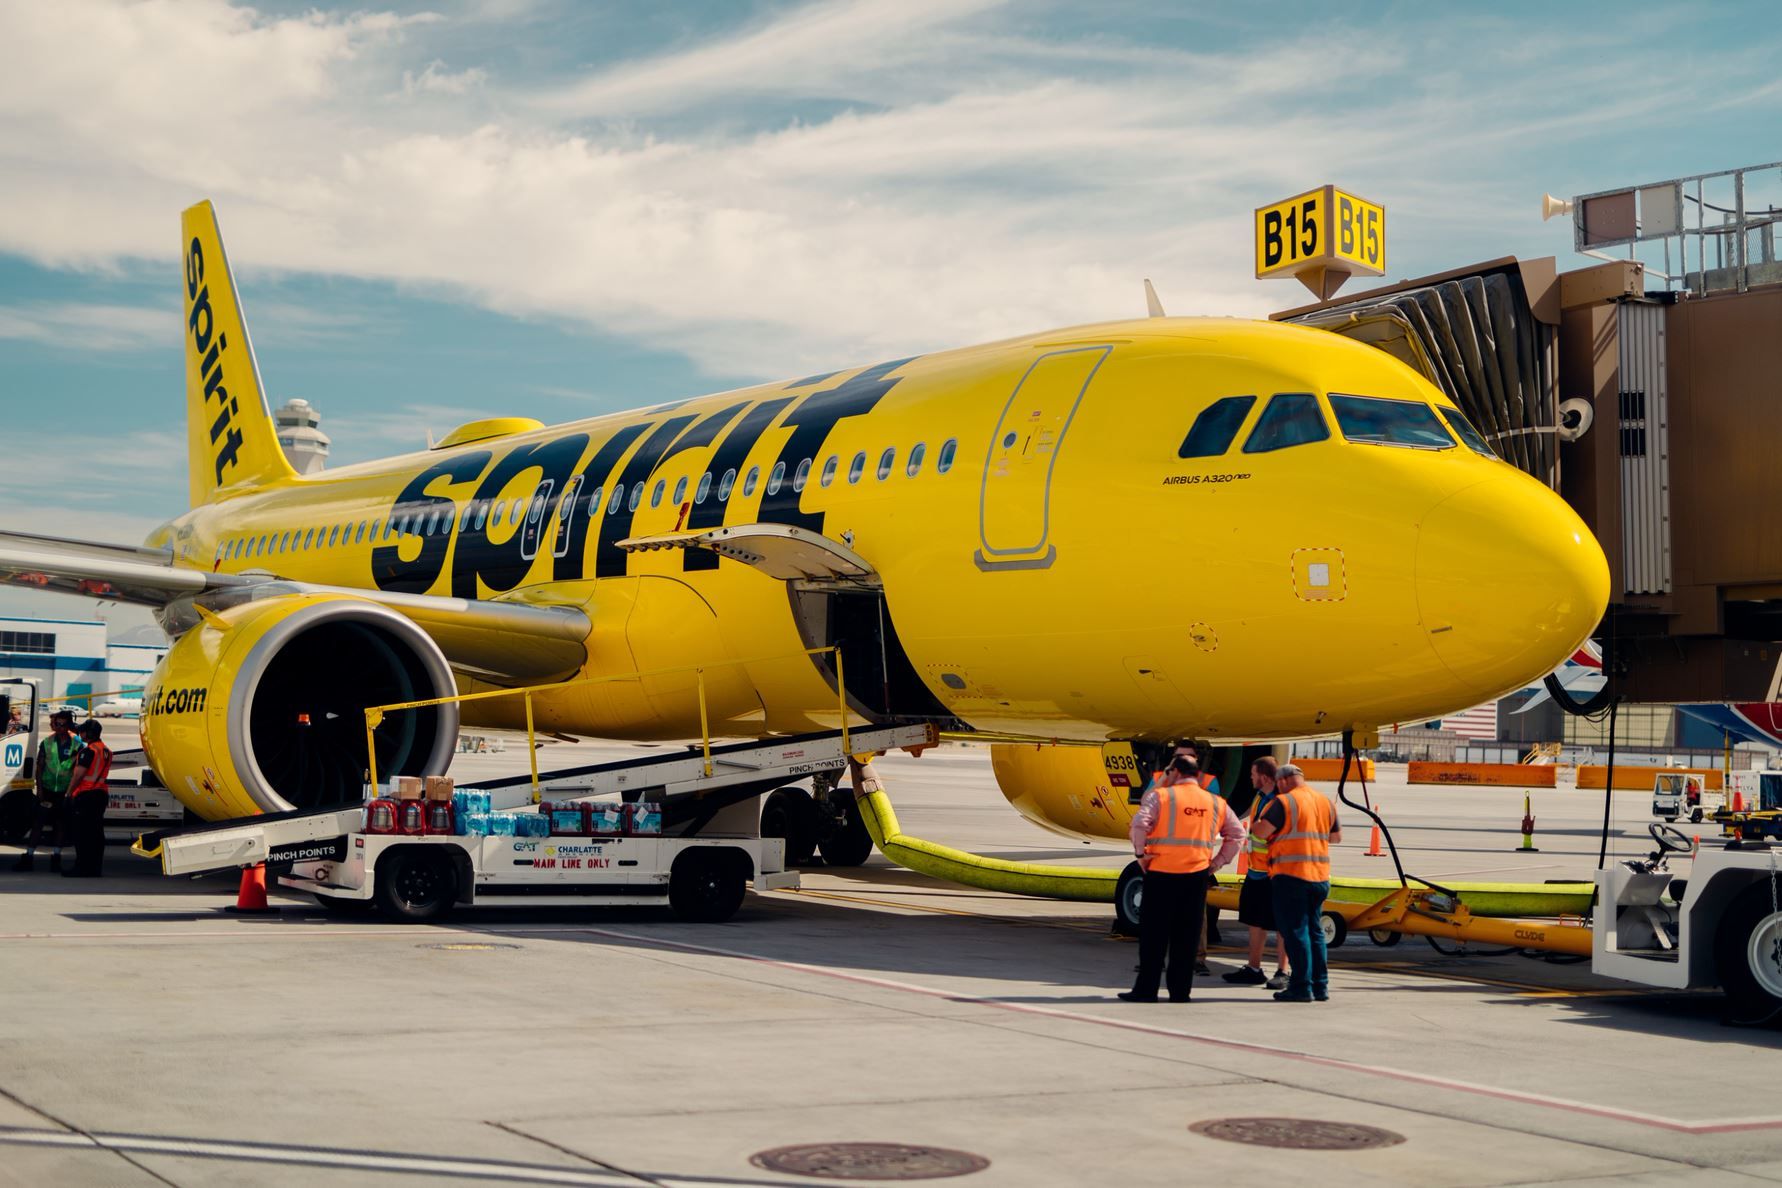 Spirit Airlines A320neo at the gate. 